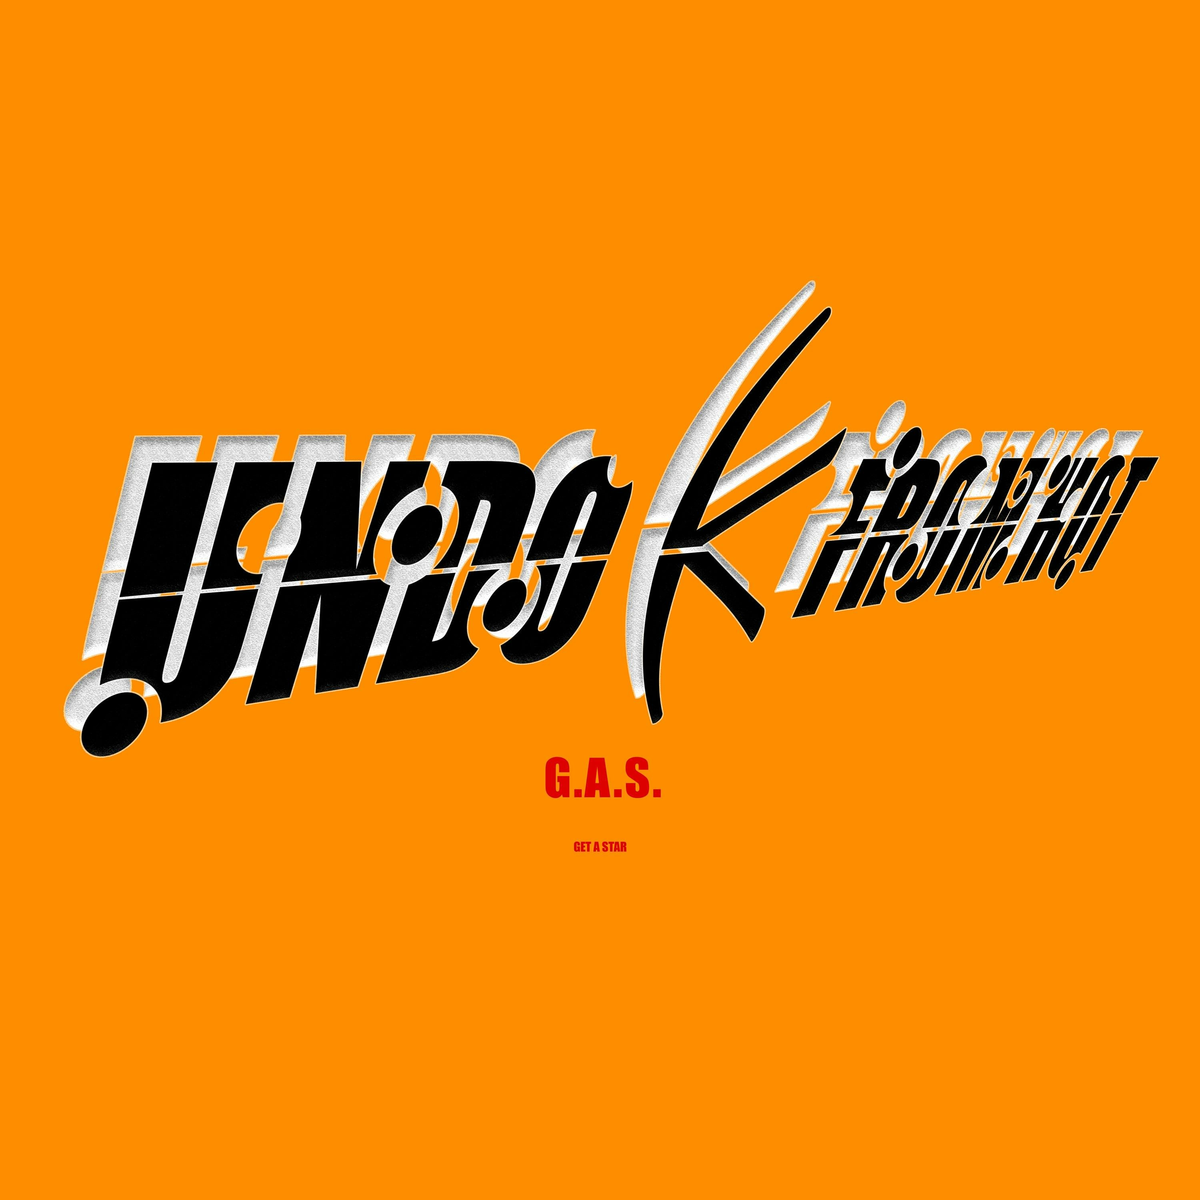 the cover art for the album 'G.A.S Get a Star' by Undo K From Hot